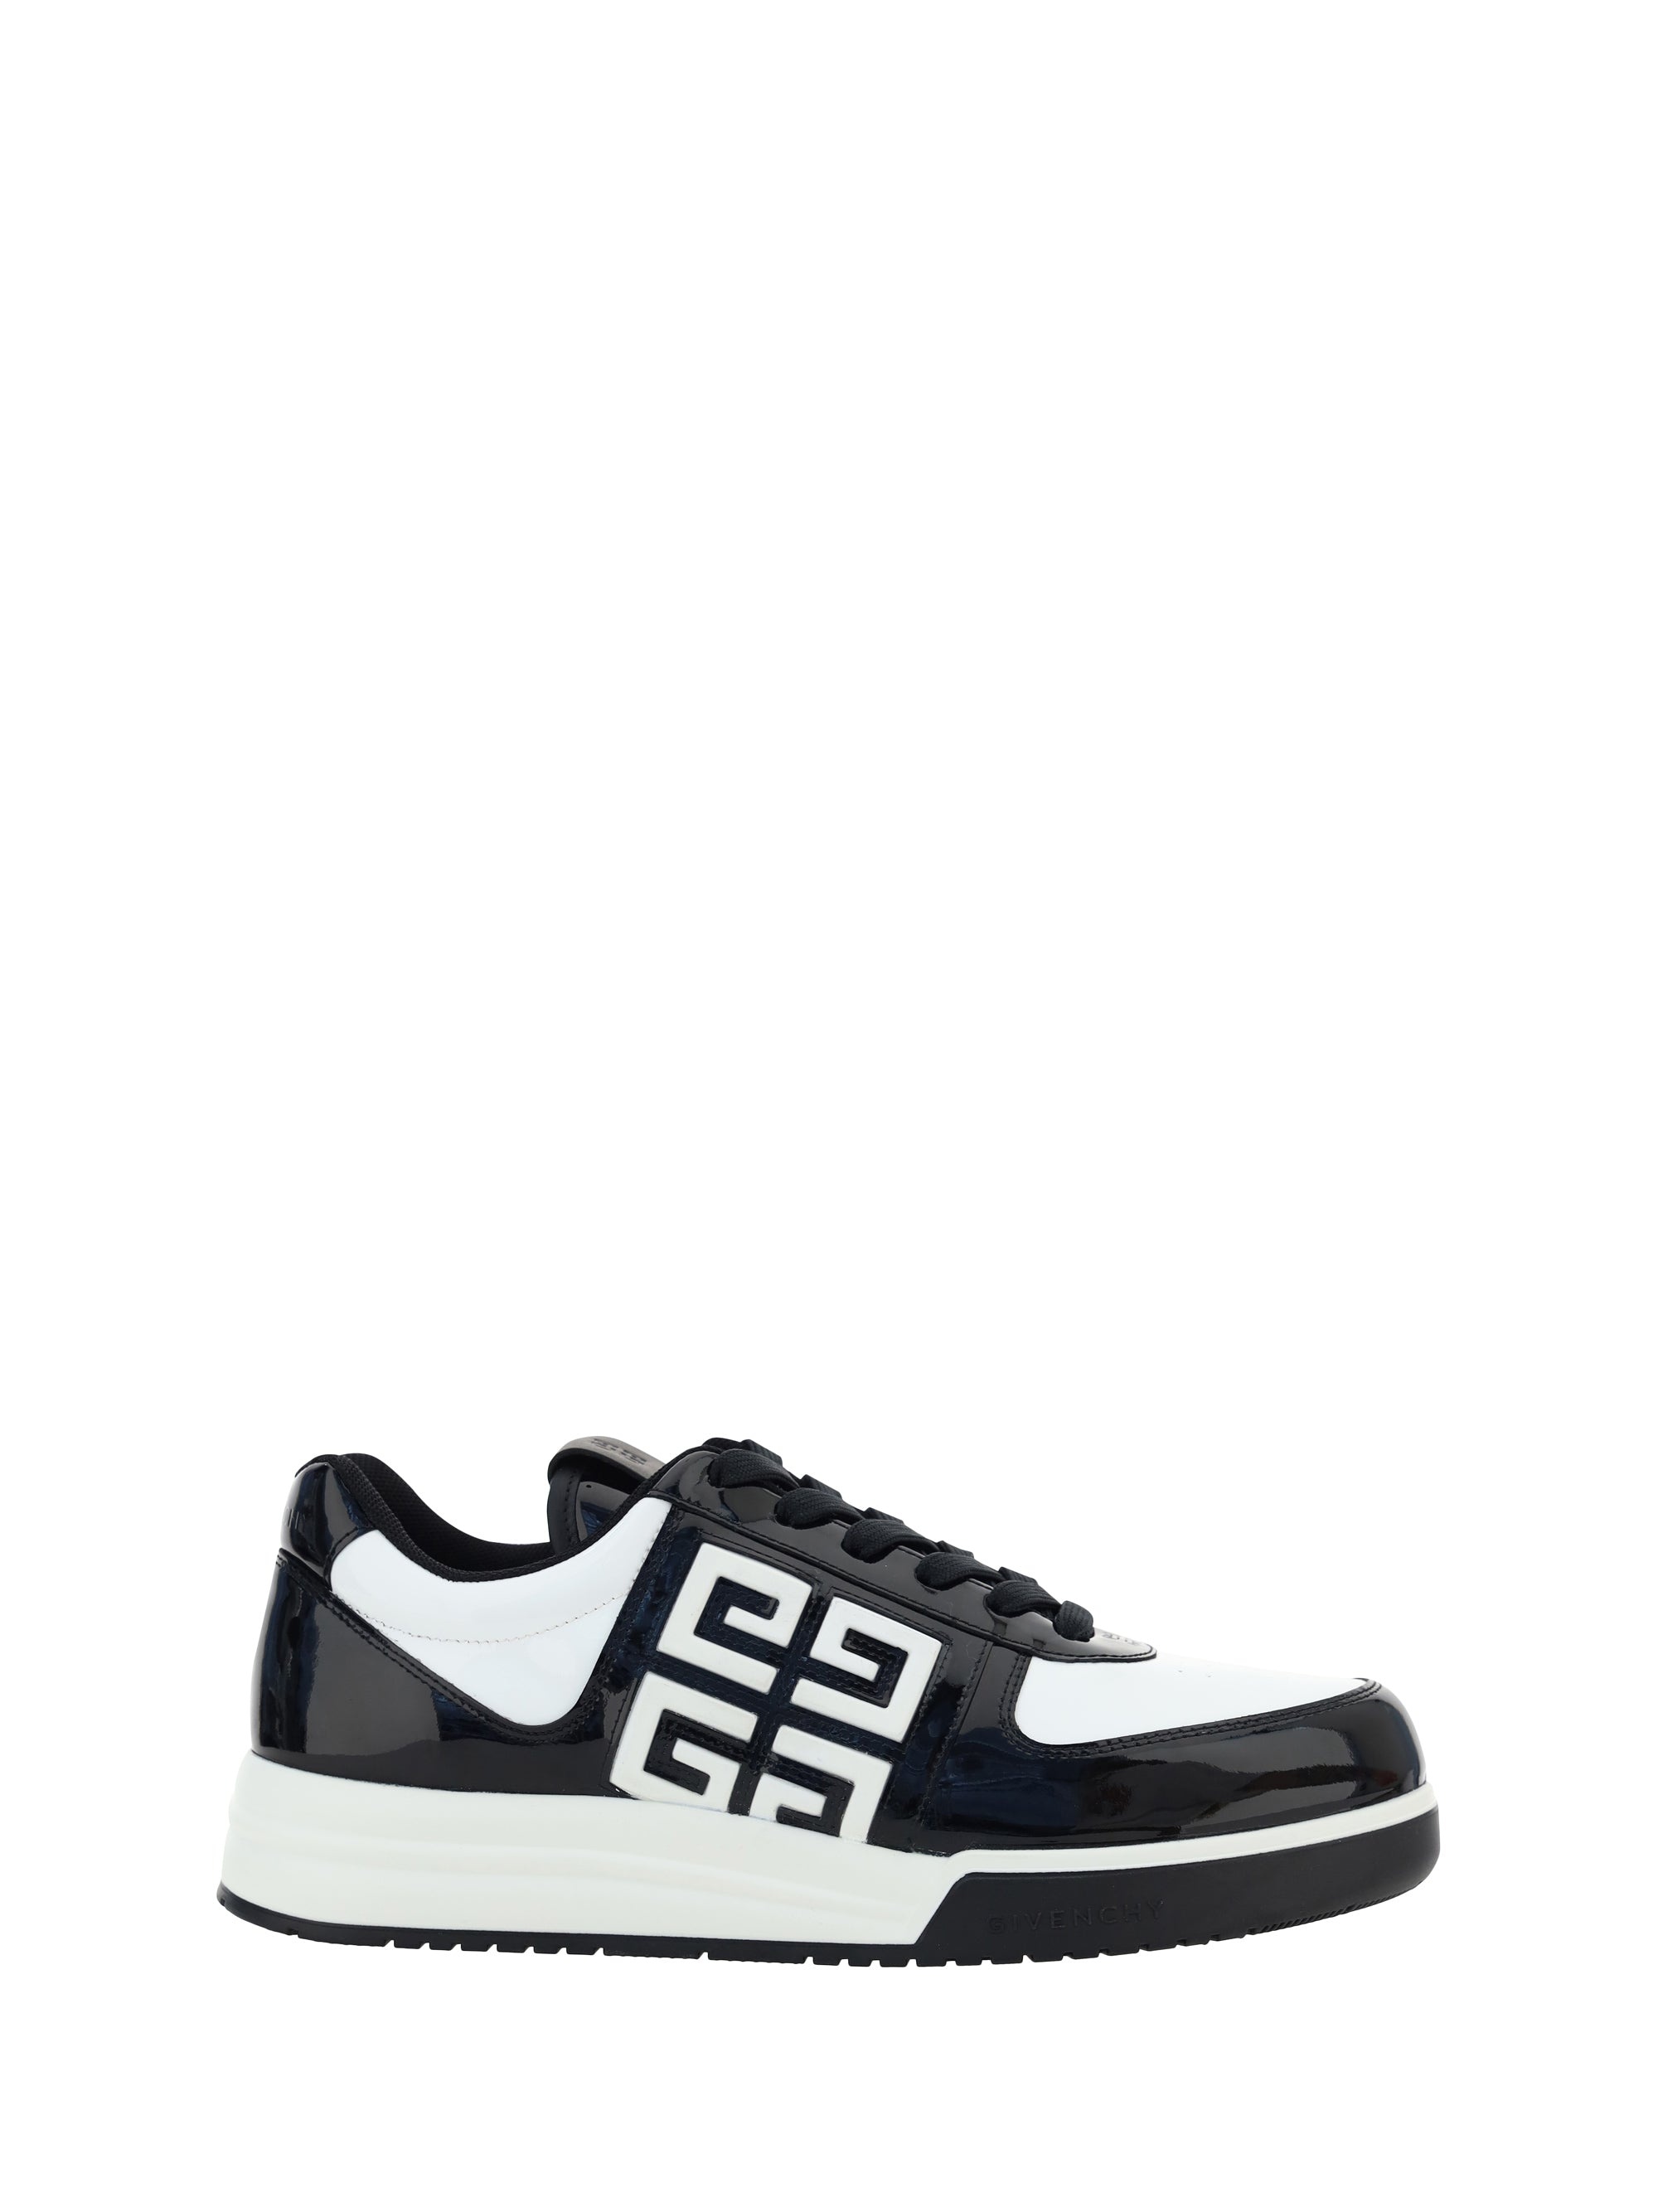 Givenchy Men G4 Low Top Sneakers - 1